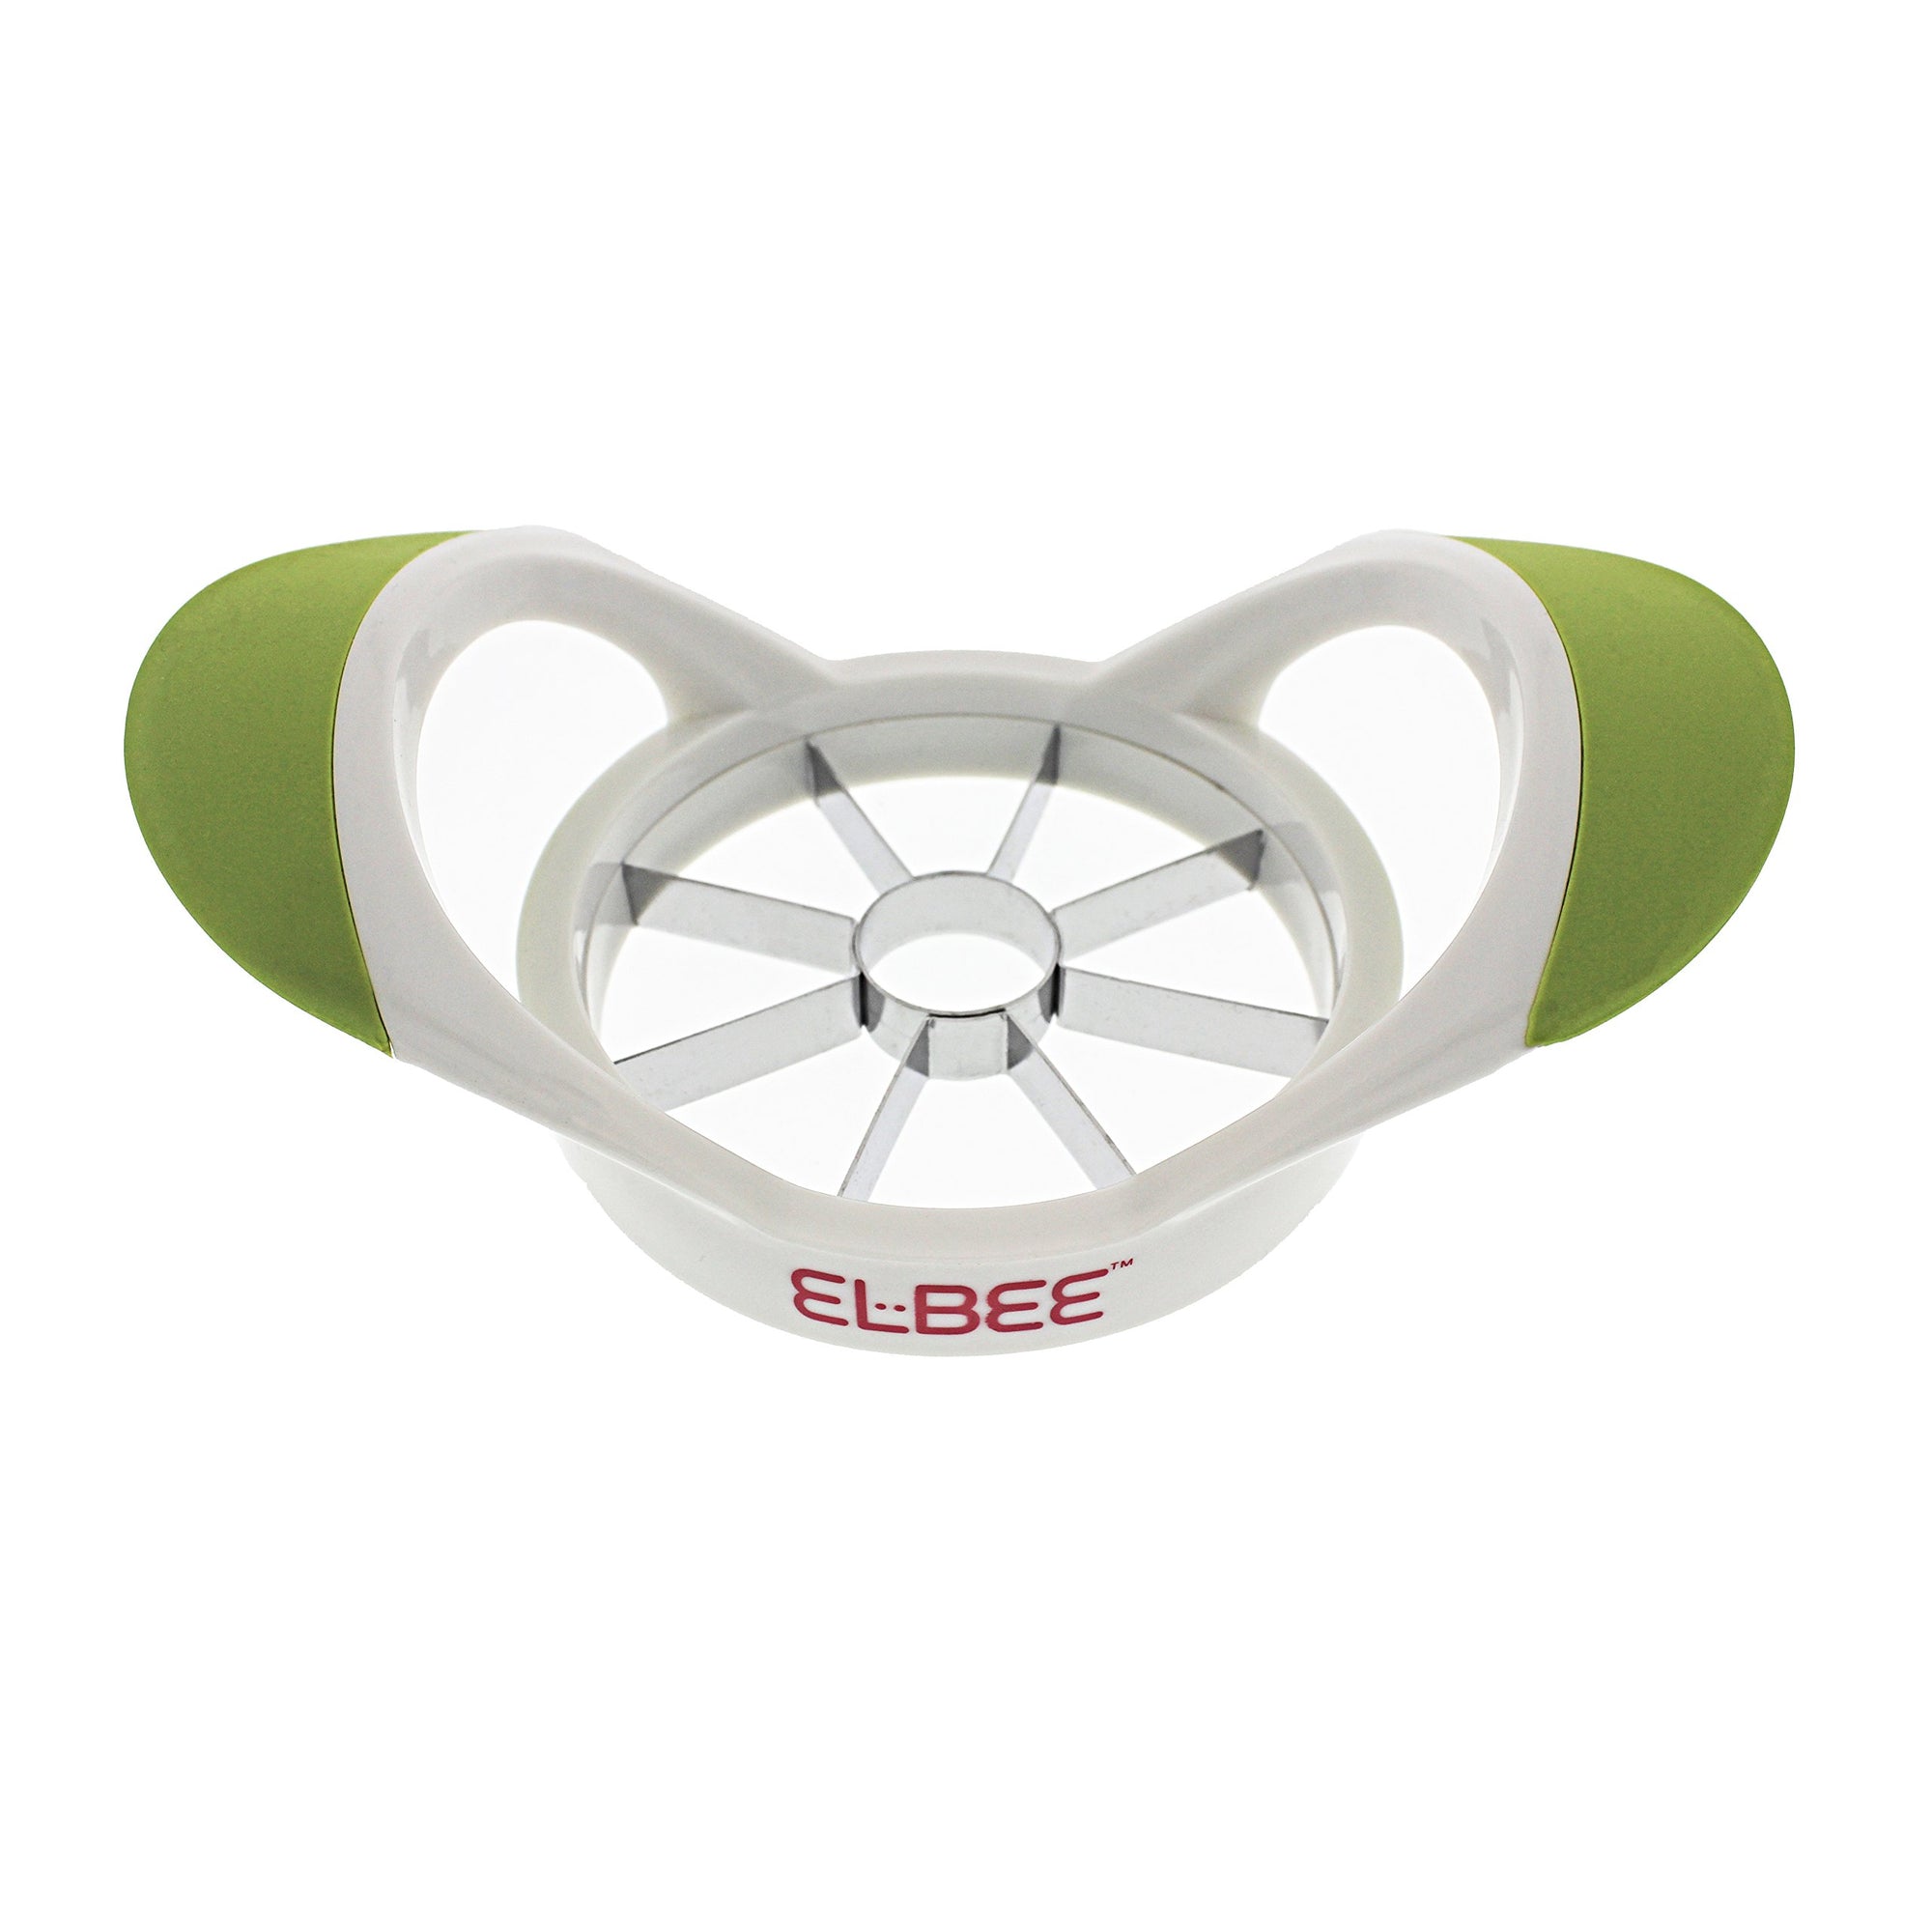 Elbee Apple Corer - Comfortable Grip Apple Slicer - Quality Stainless Steel Blade Makes 8 Slices